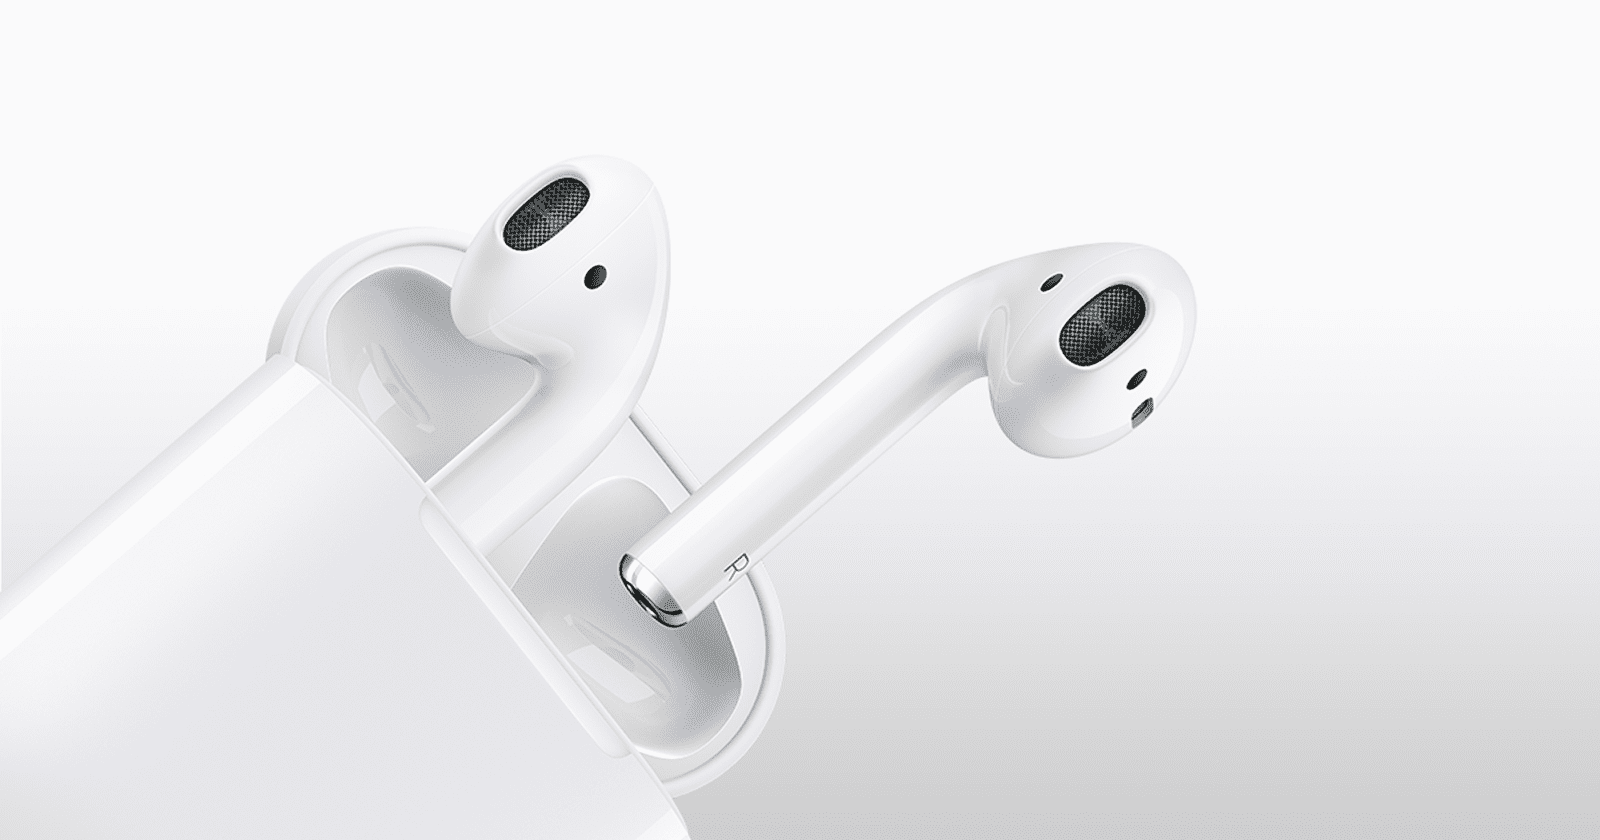 8 Ways to See the Charge Level of Your AirPods